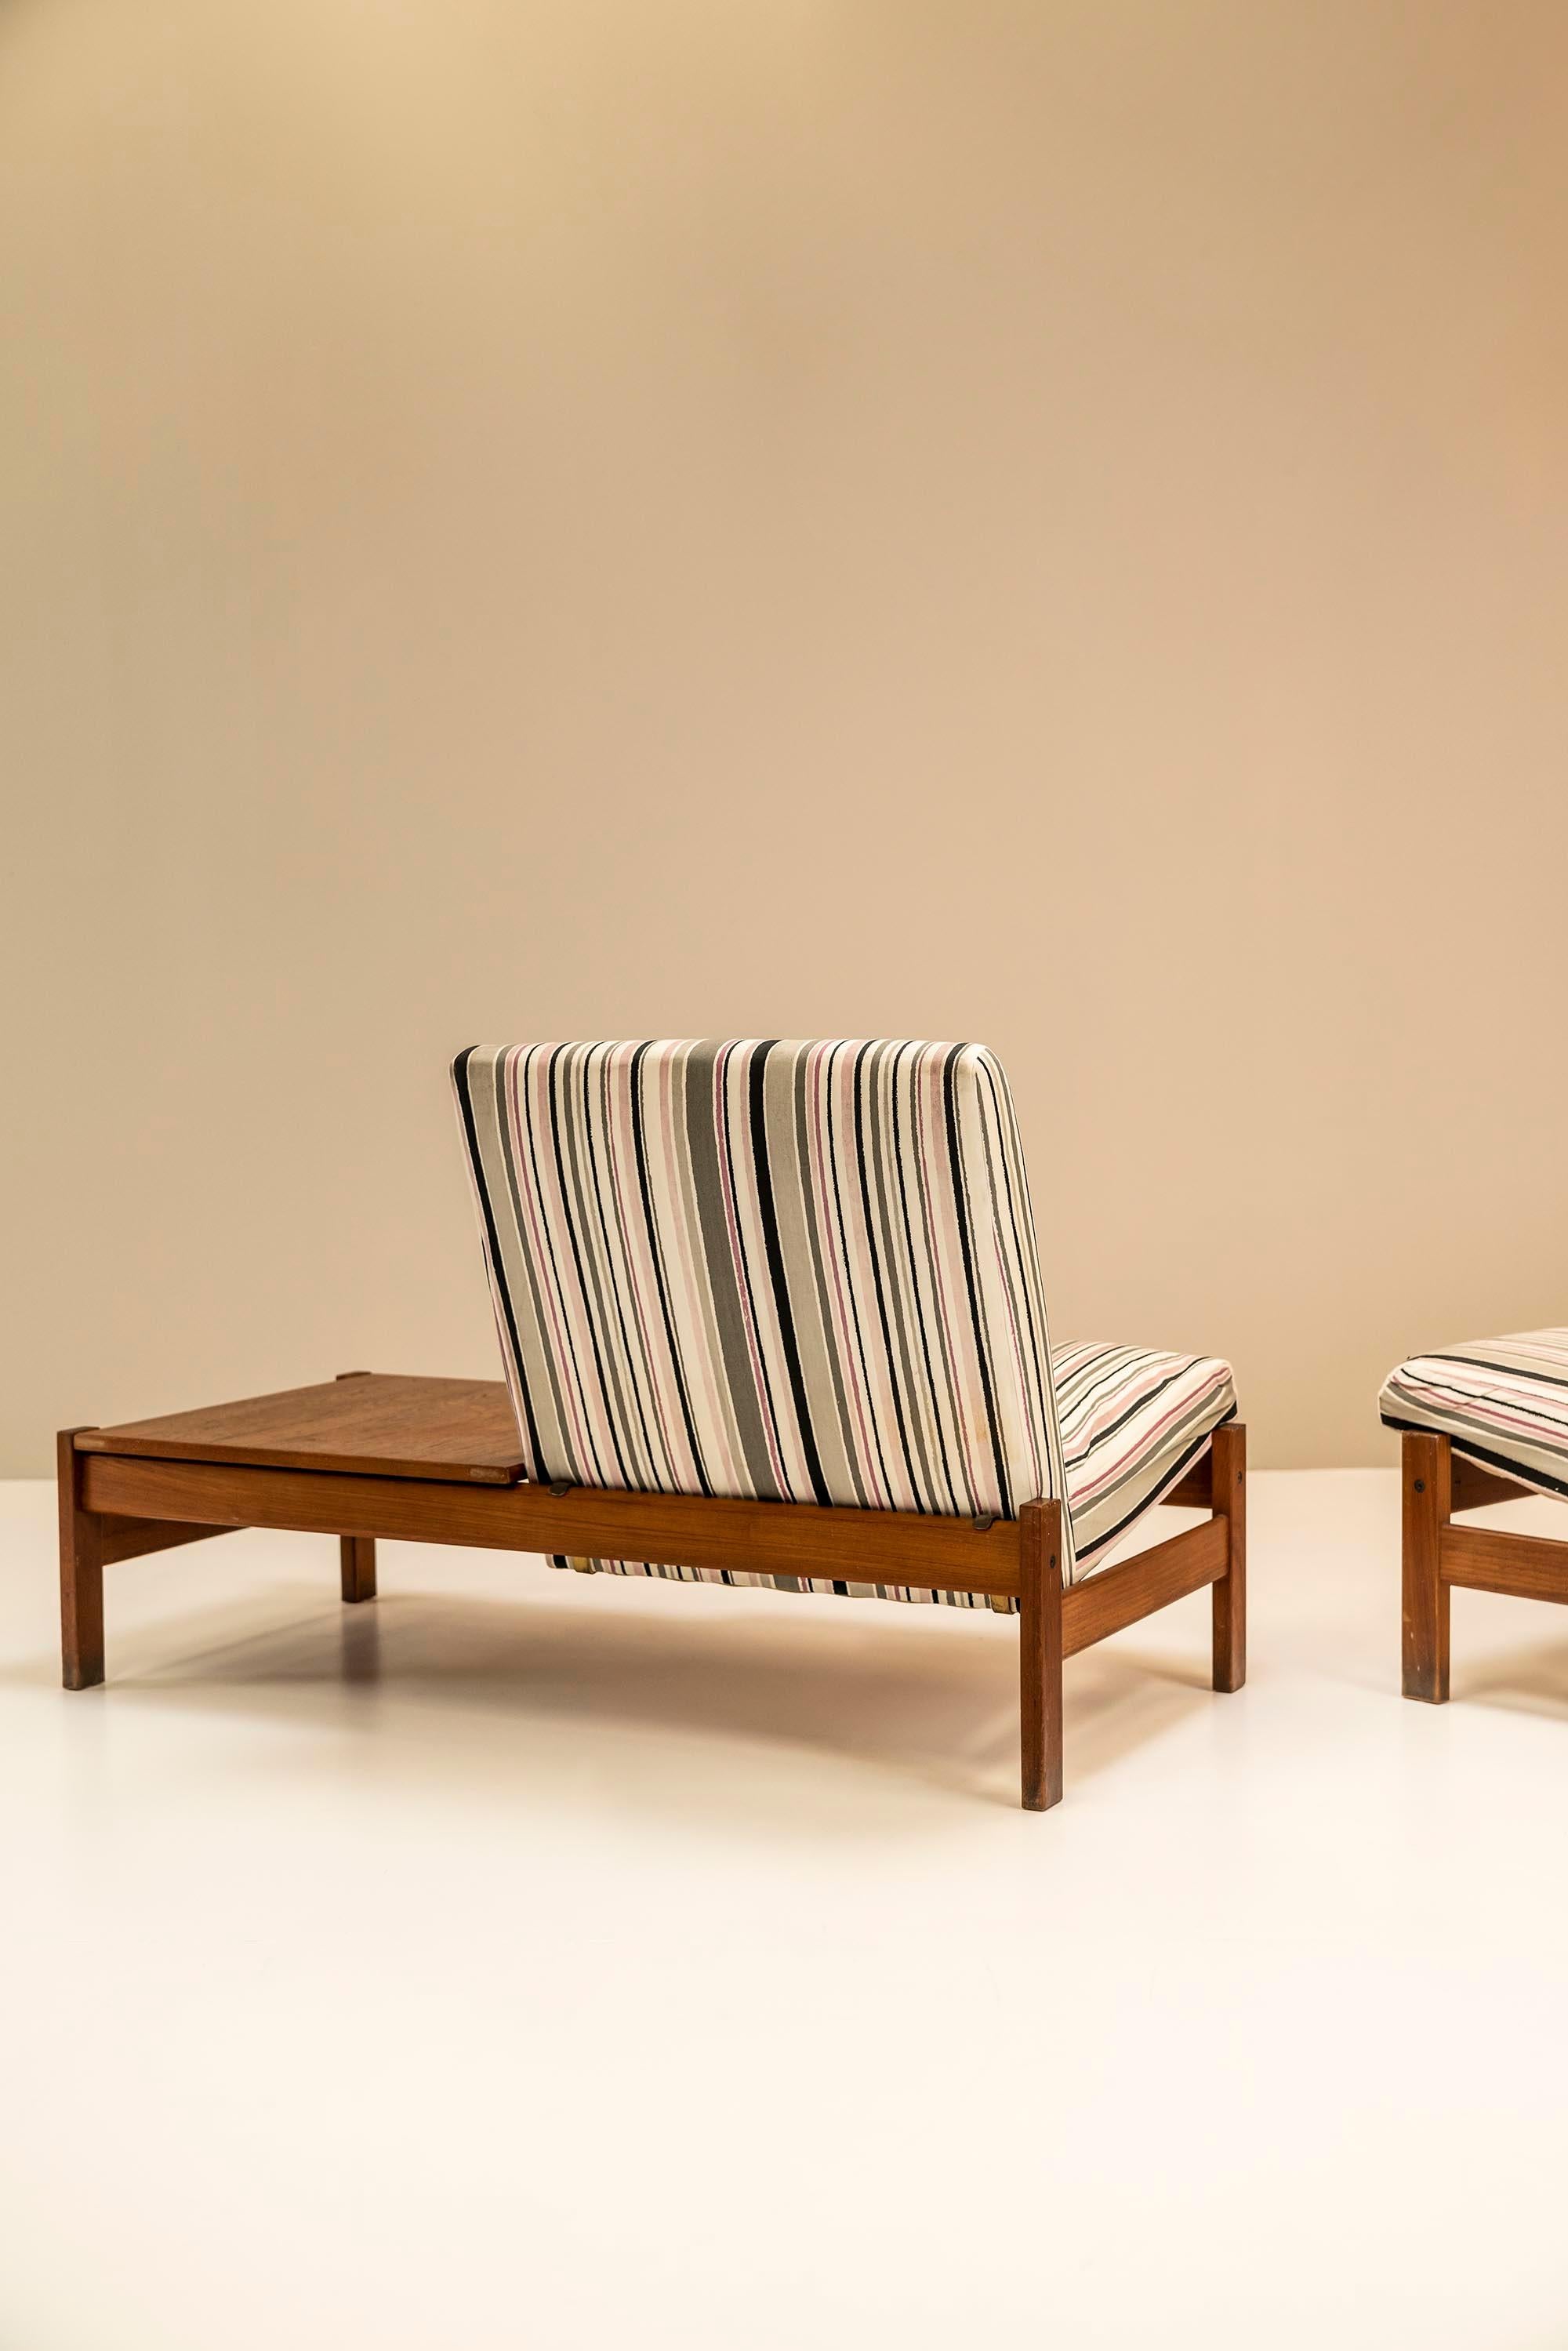 Mid-20th Century Modular Bench Set in Teak and Original Upholstery, Italy, 1960s For Sale